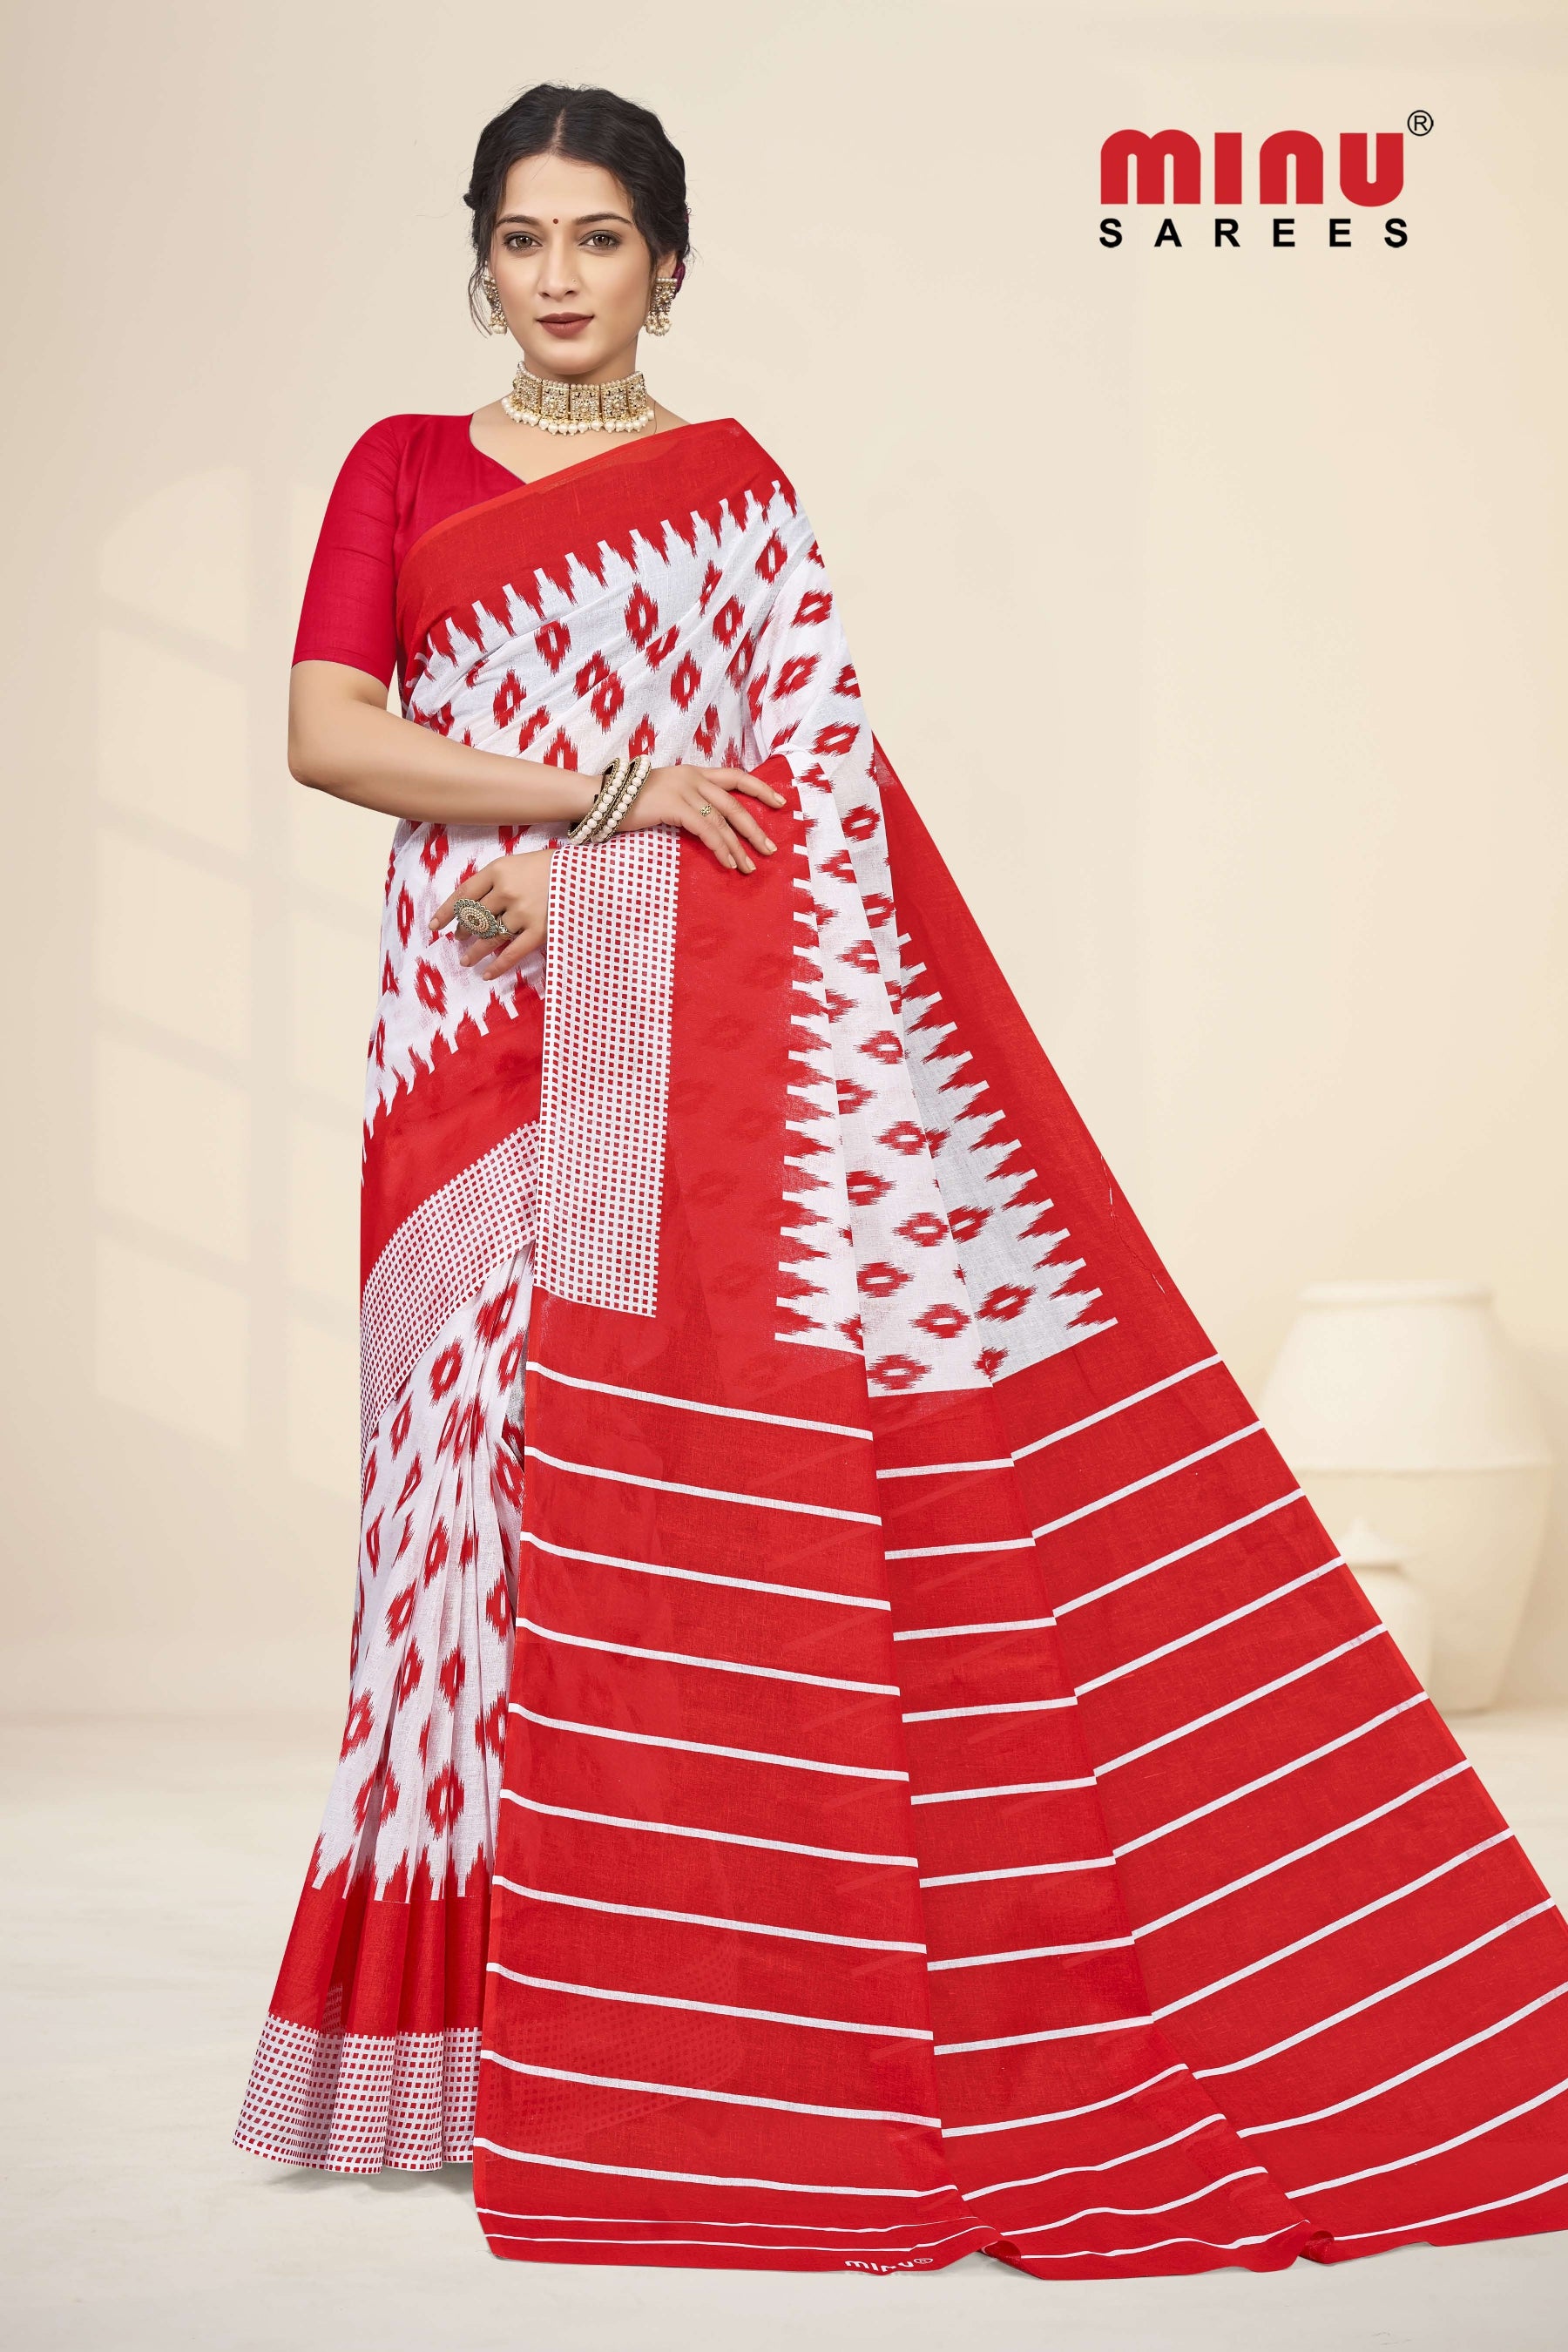 Best fashionable printed saree wearing woman 